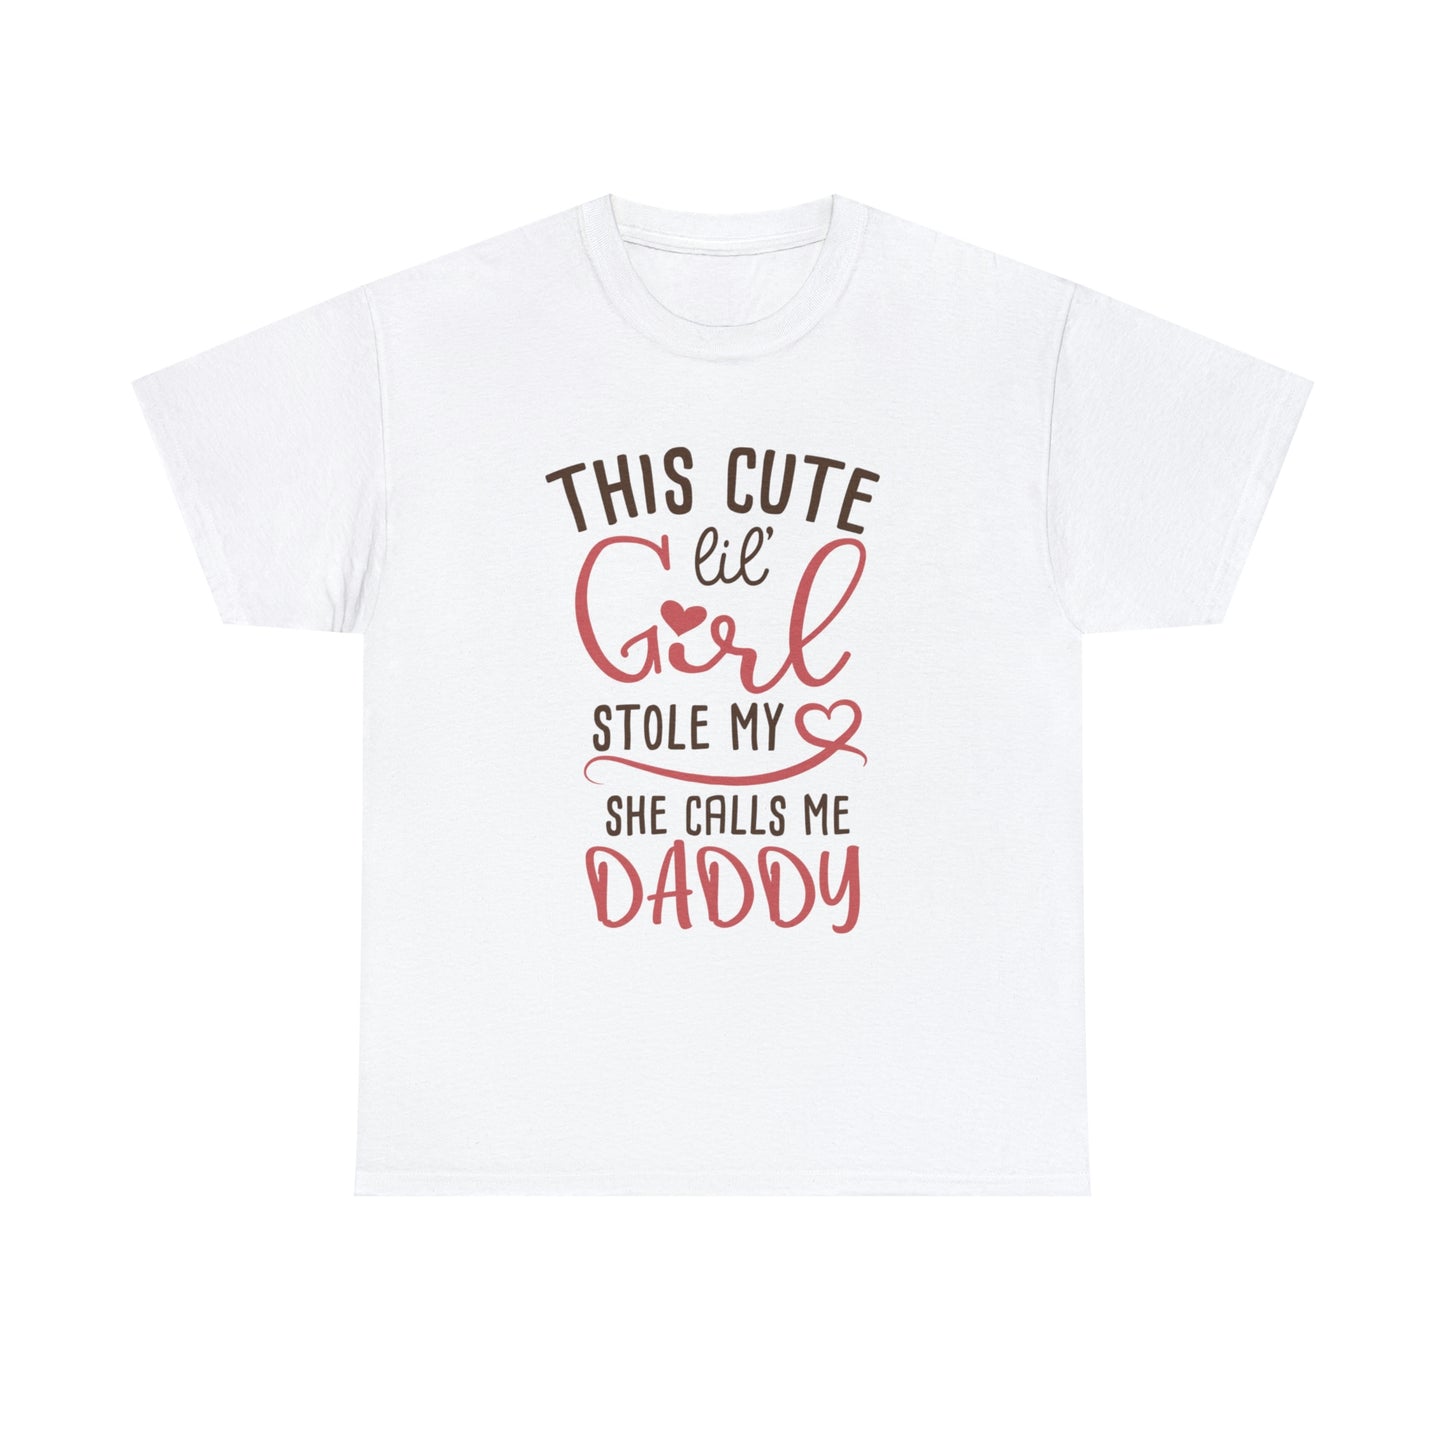 THIS CUTE LIL GIRL STOLE MY HEART T-SHIRT